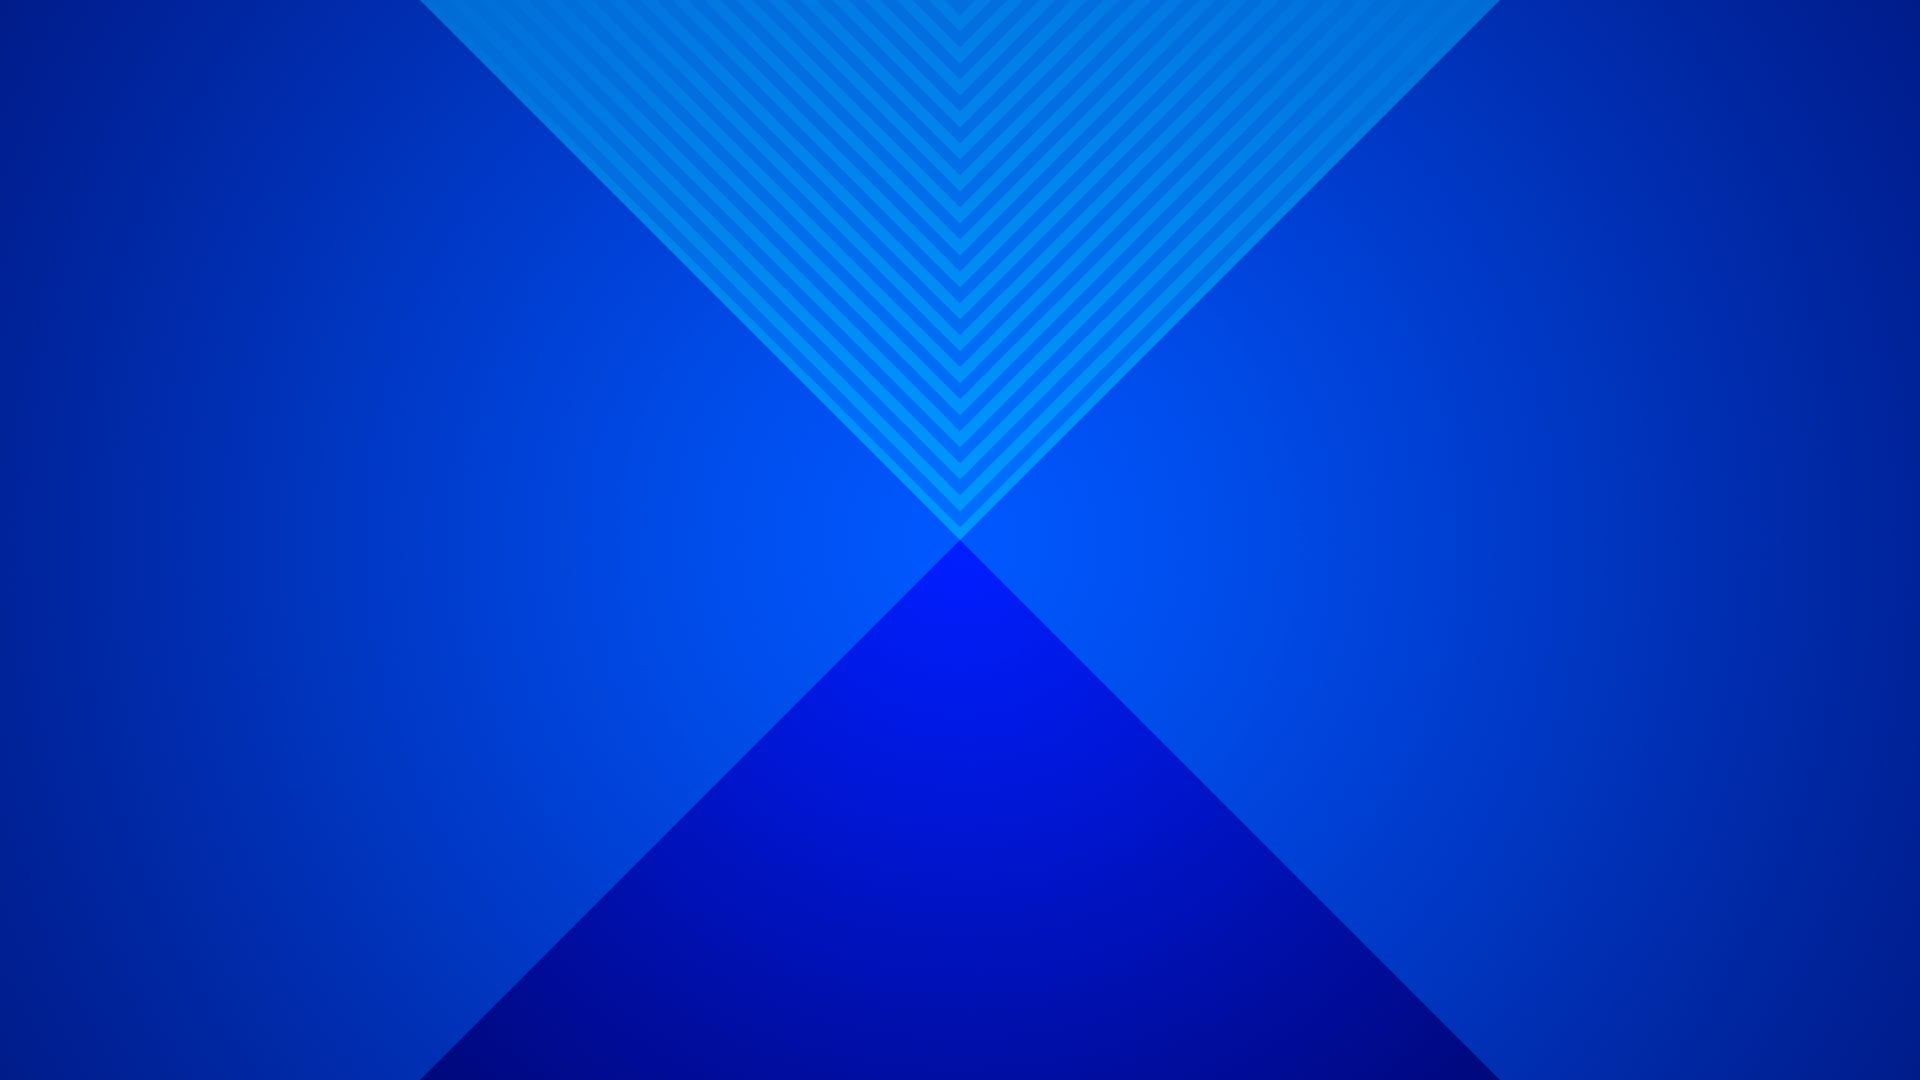 blue, shapes, triangle, cross, abstract